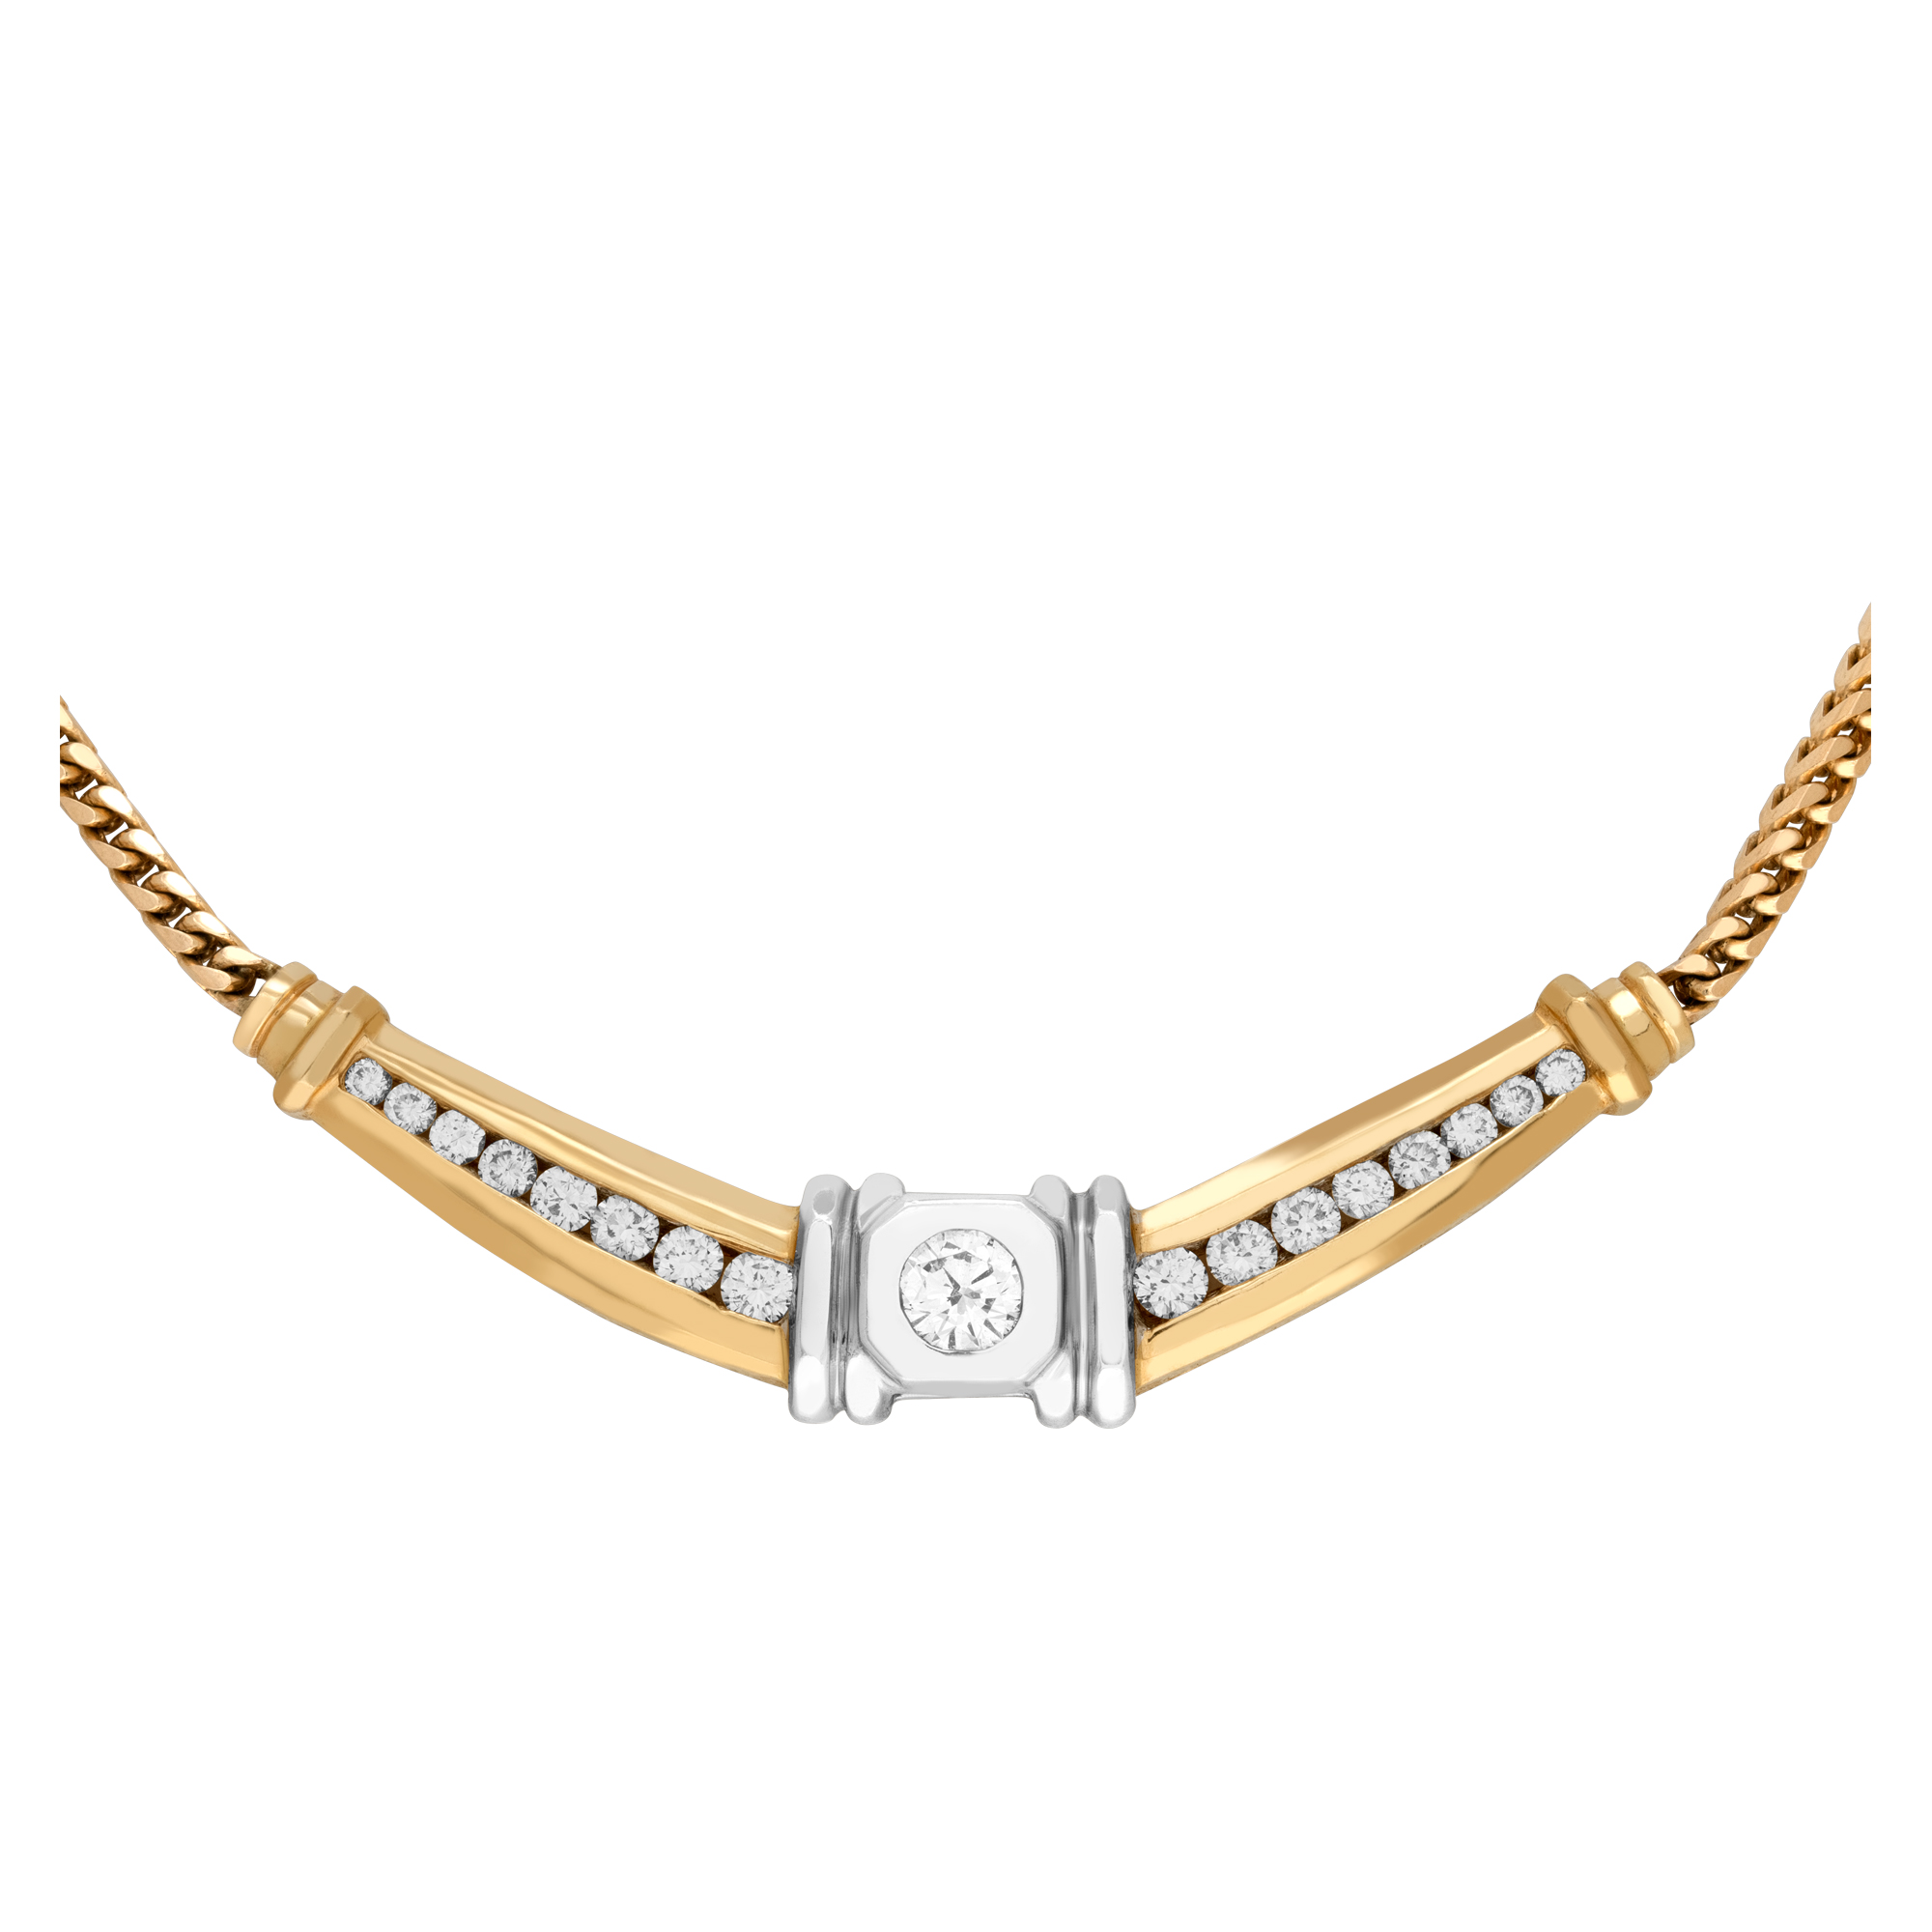 Lovely Diamond Chain Necklace In 14k Yellow And White Gold. image 1